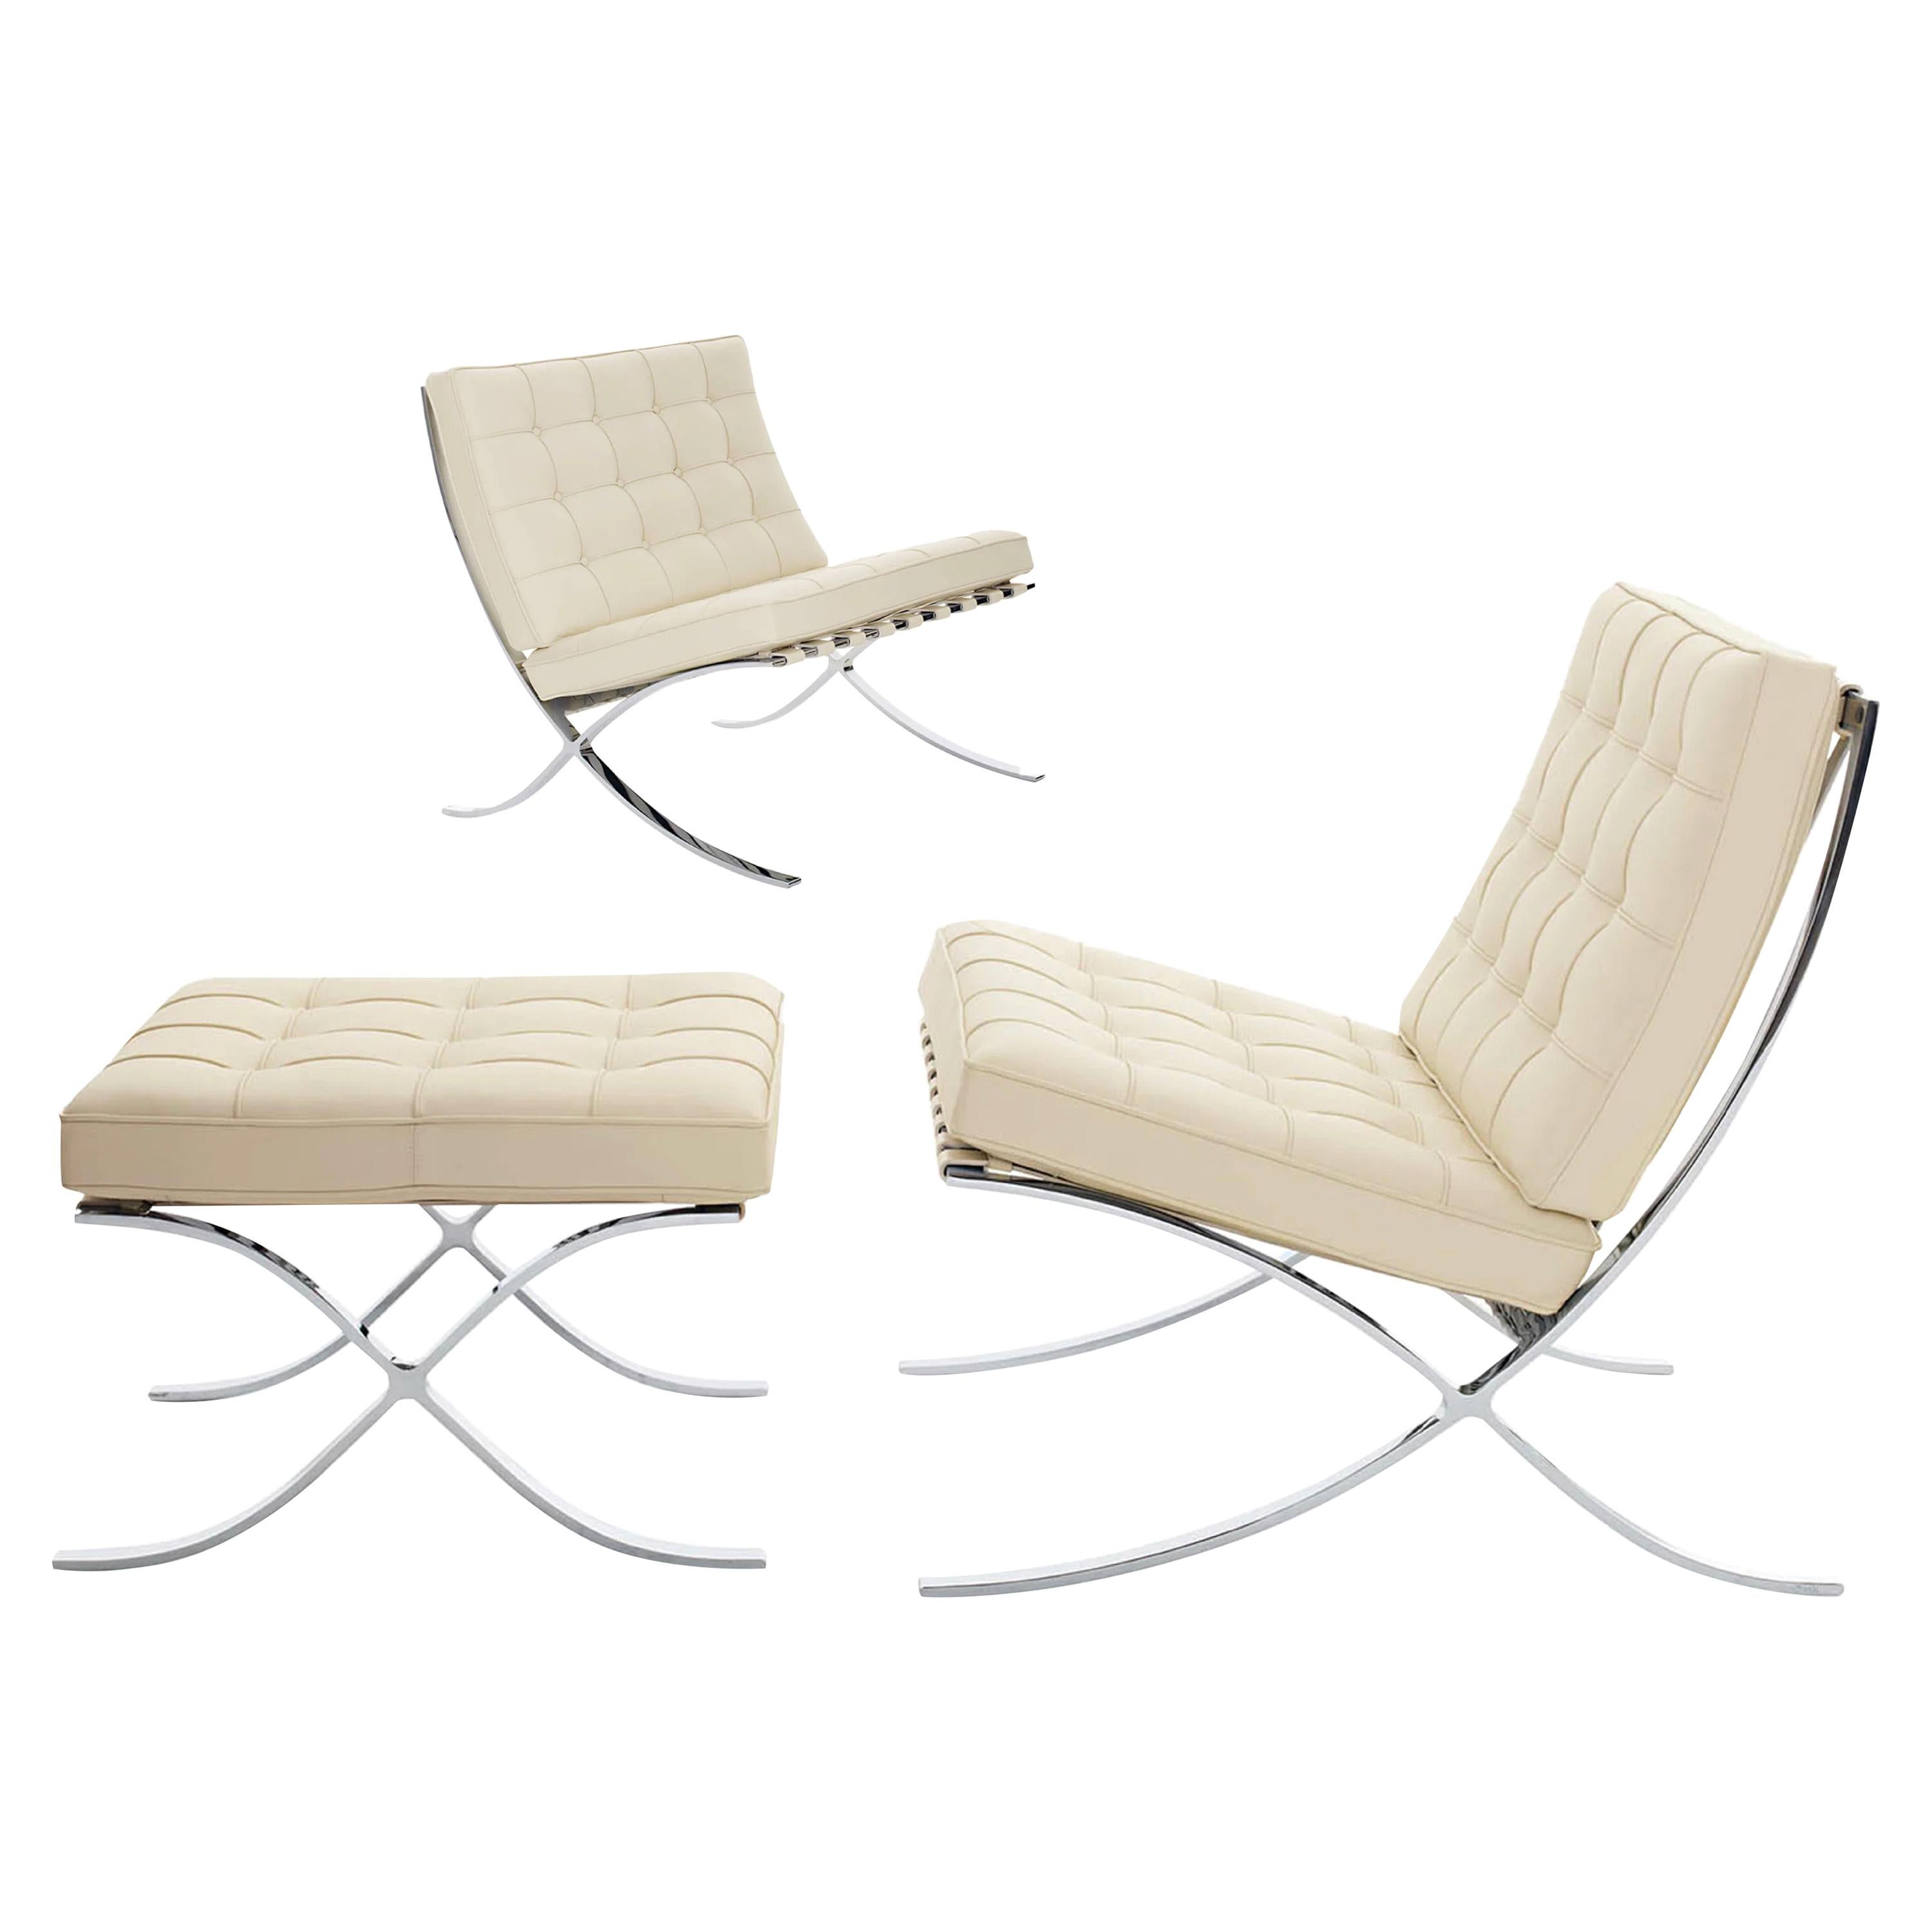 Knoll Barcelona Lounge Chair, Ivory Leather, Mies van der Rohe